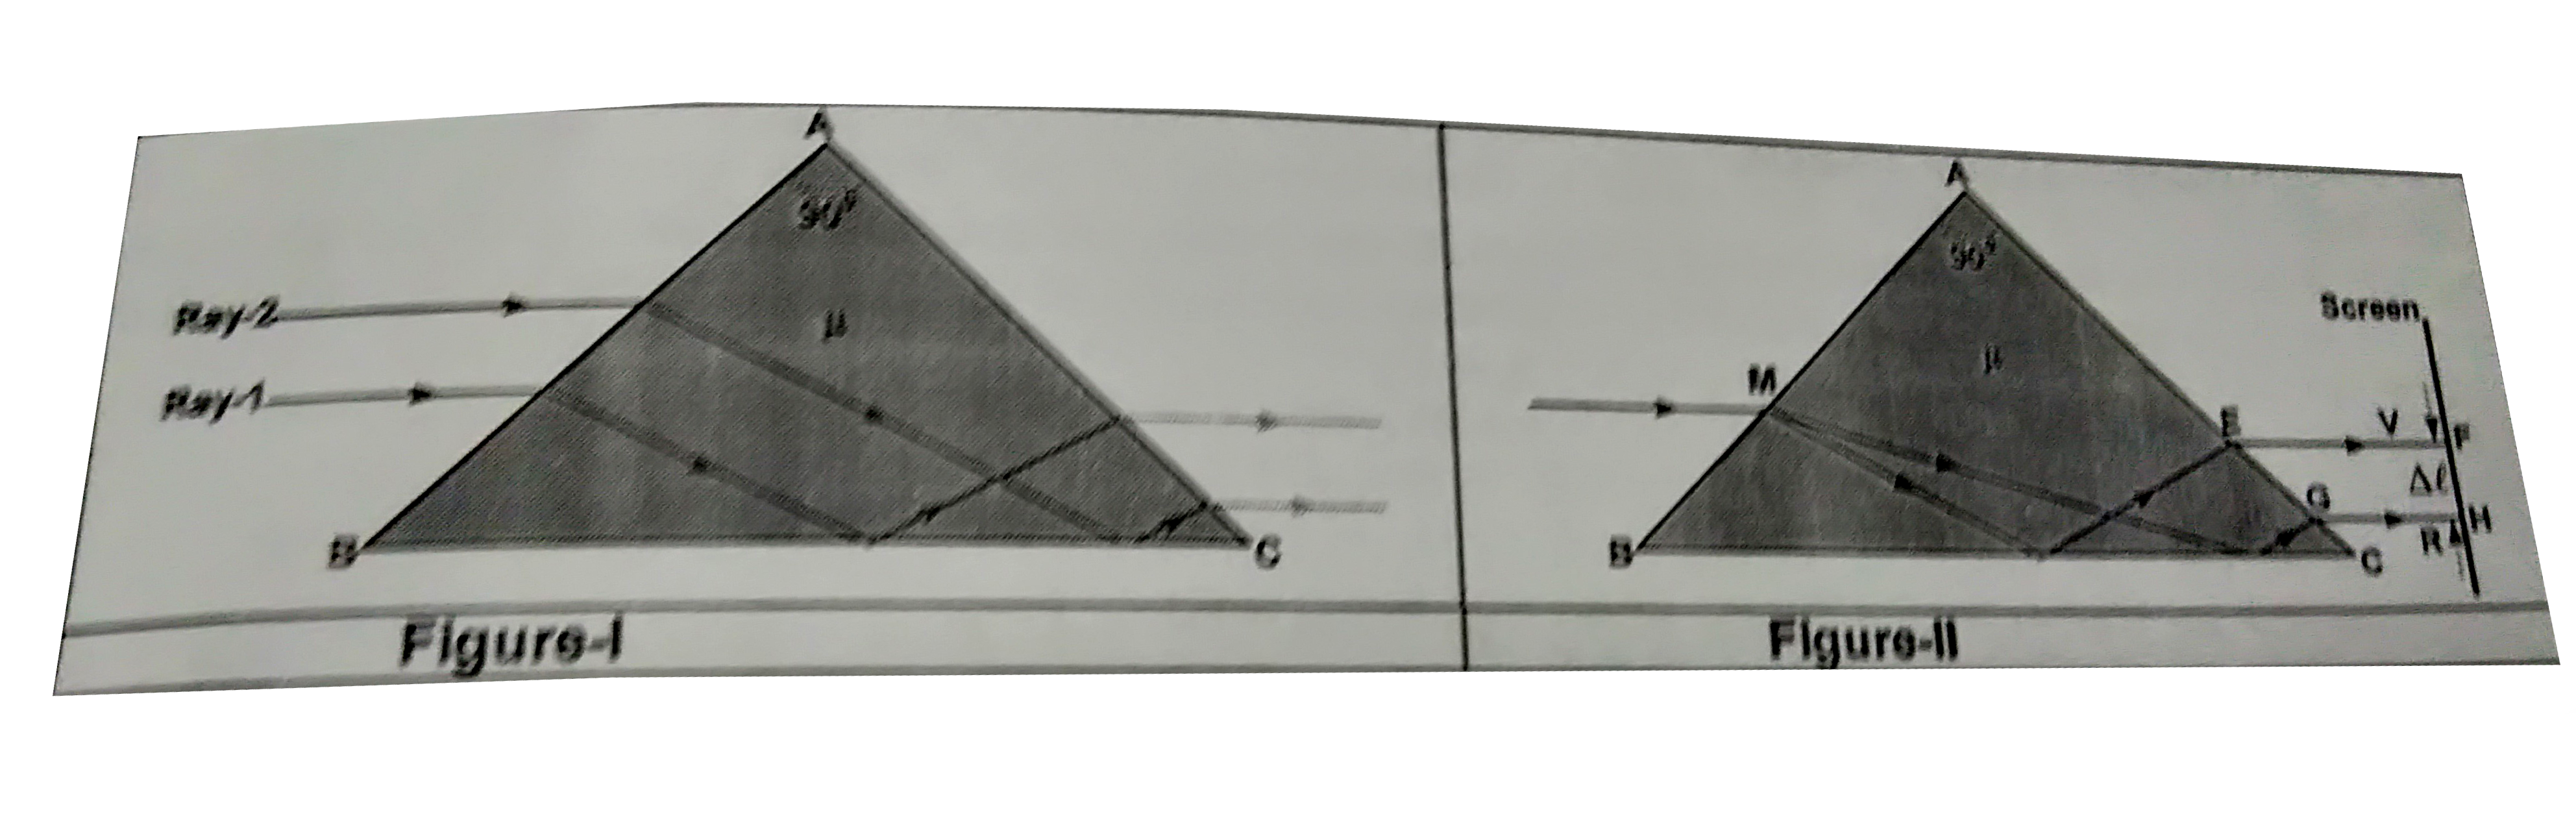 ABC is an isosceles right angled triangular refecting prism of average refractive index mu. When incident rays on face AB are paralel to face BC, then they emerges from Face AC, which are also parallel to Face BC as shown in figure-I. The prims capable to do so, known as Dove Prism. In figure II, the Dove Prism is used for dispersion of incident light containing red colour and violet colour only. The red colour and violet colour lights are separated (displaced) on screen by a distance Deltal. In reality, each ray of any colour has some width, whcih can be designated as d. It is clear that an observer candistinguish the red and violet rays that emerges from prism only if Deltalged. Otherwise the bundles of rays will overlap and mix.   [Given for Dove Prism in figure II: mu(R)=sqrt(5/2),Deltamu=mu(V)-mu(R)=0.02, sqrt(5)=2.25, EF1m and AB=4cm]      Choose the INCORRECT option